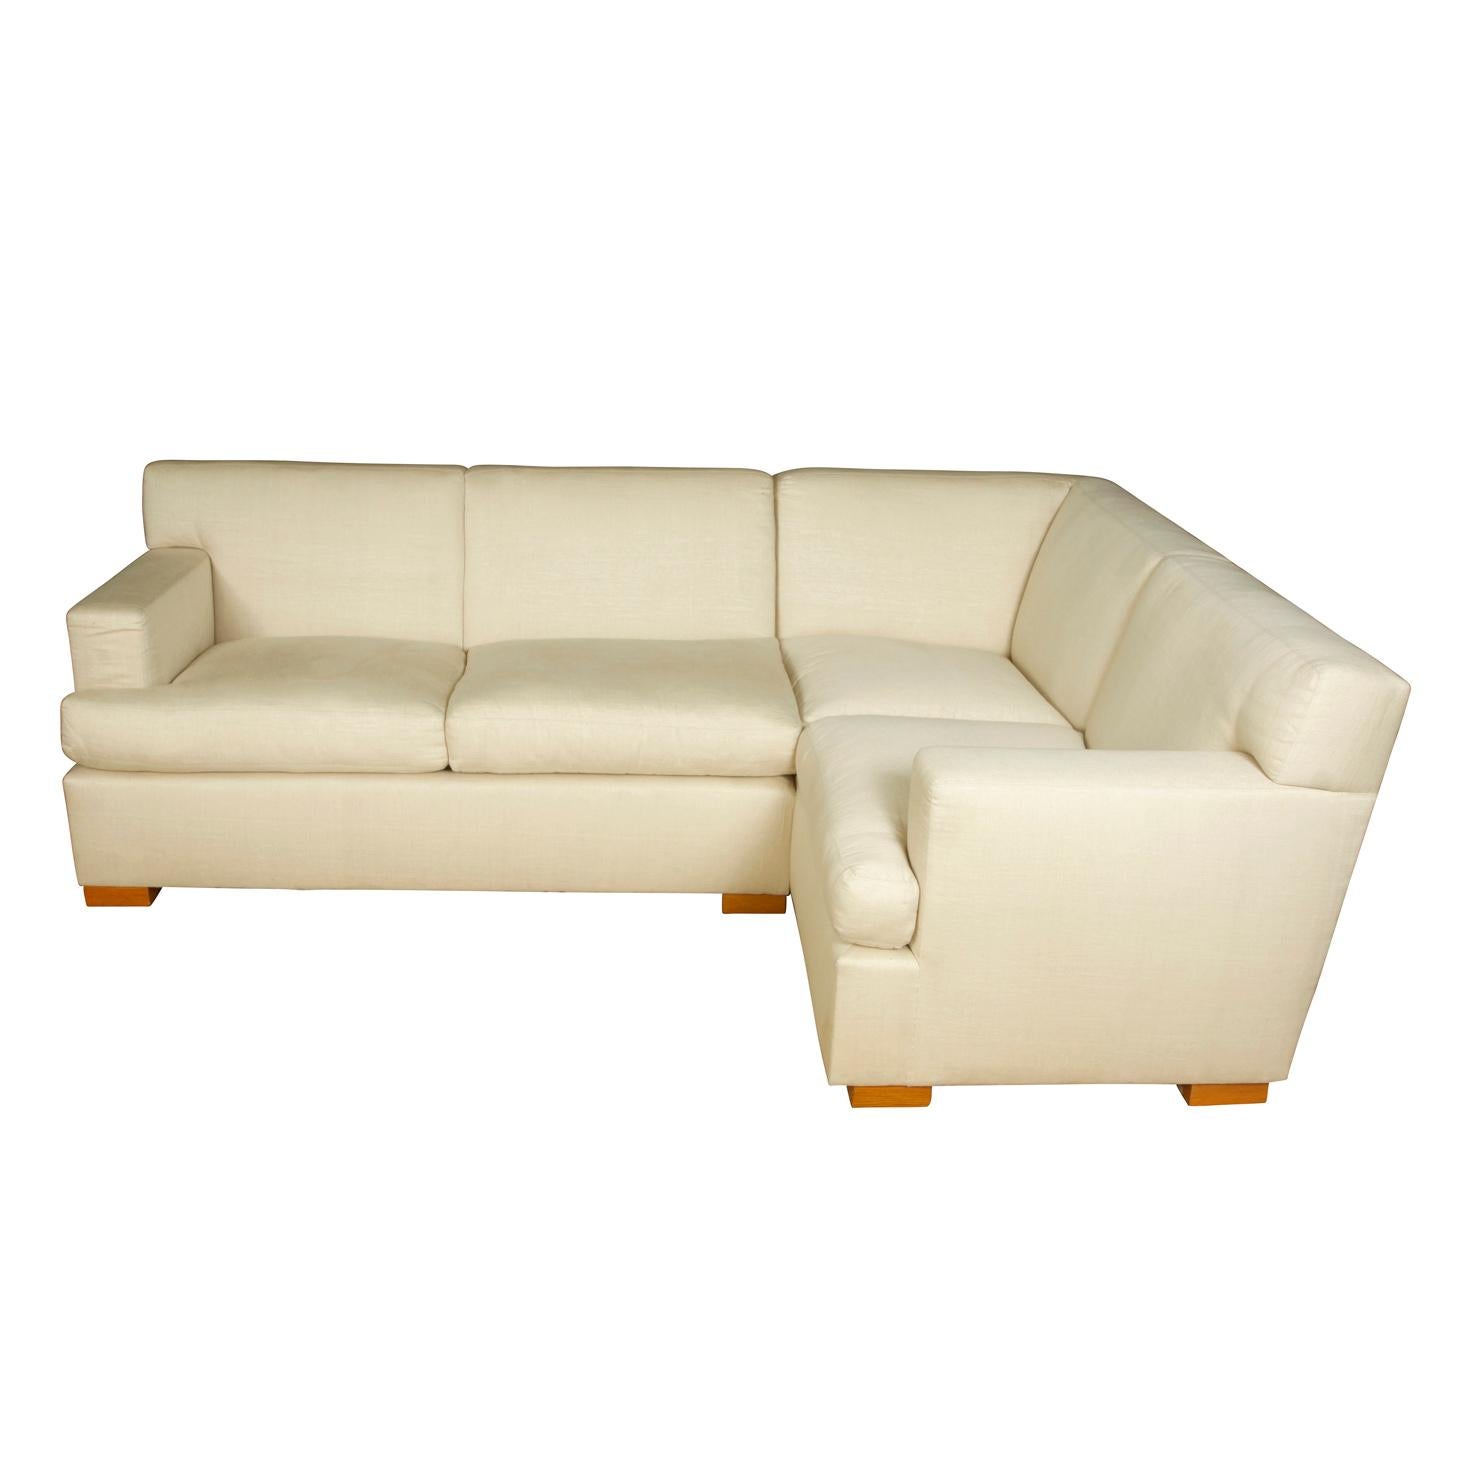 Modern cream linen sofa in sectional form comprised of two sections.